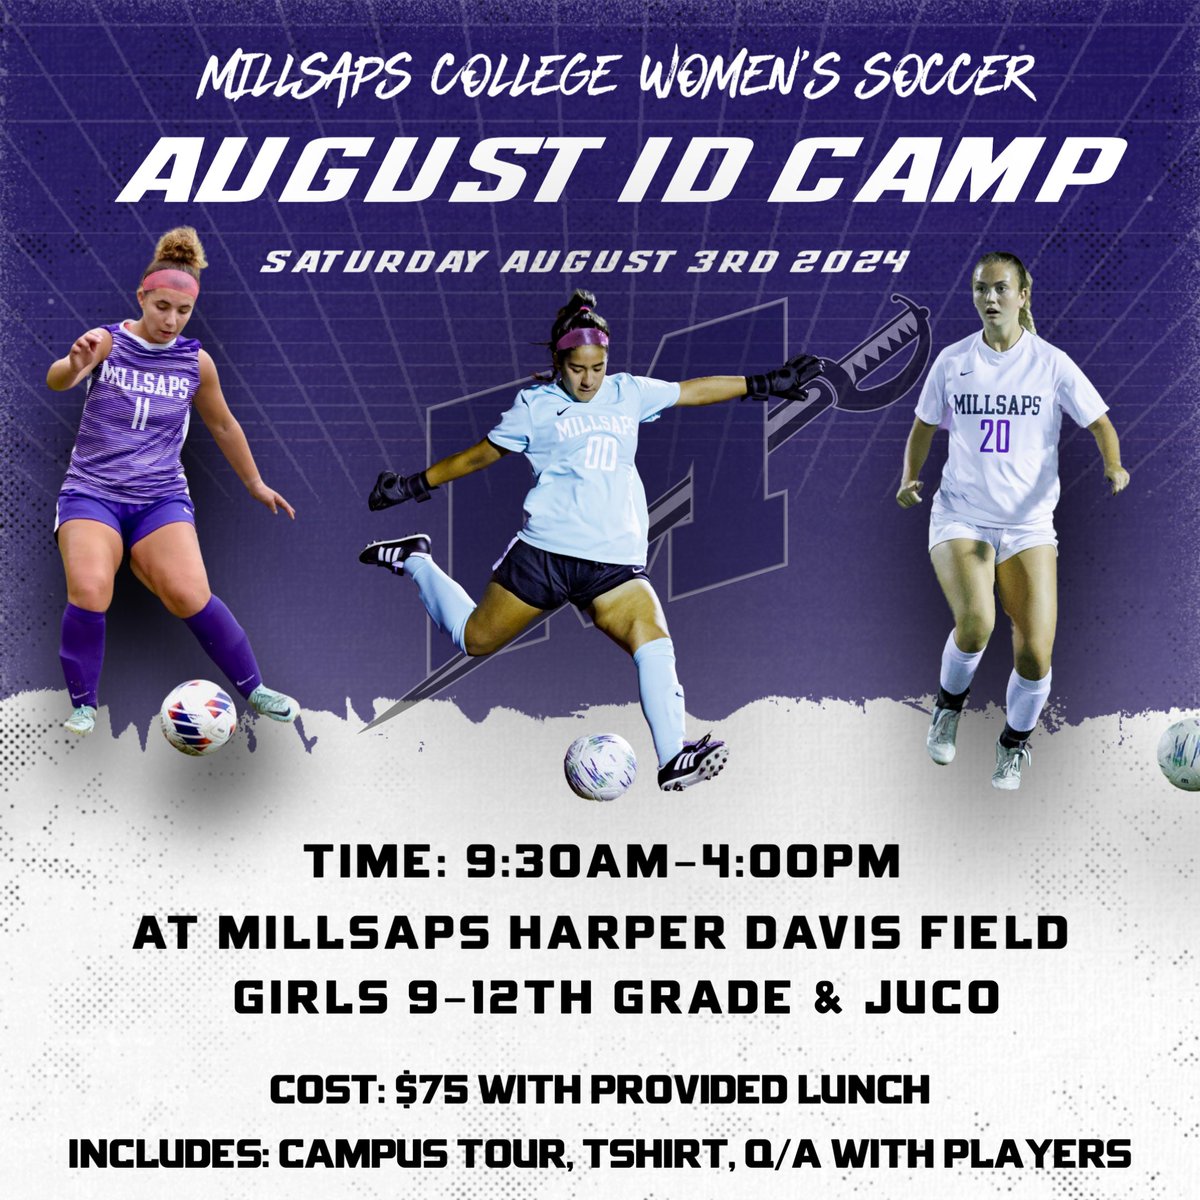 Come out and join us for our summer ID camp!! This is an excellent opportunity to get coached by our staff and check out Millsaps College!! Register today for our August ID Camp today: millsapswomenssoccercamps.com